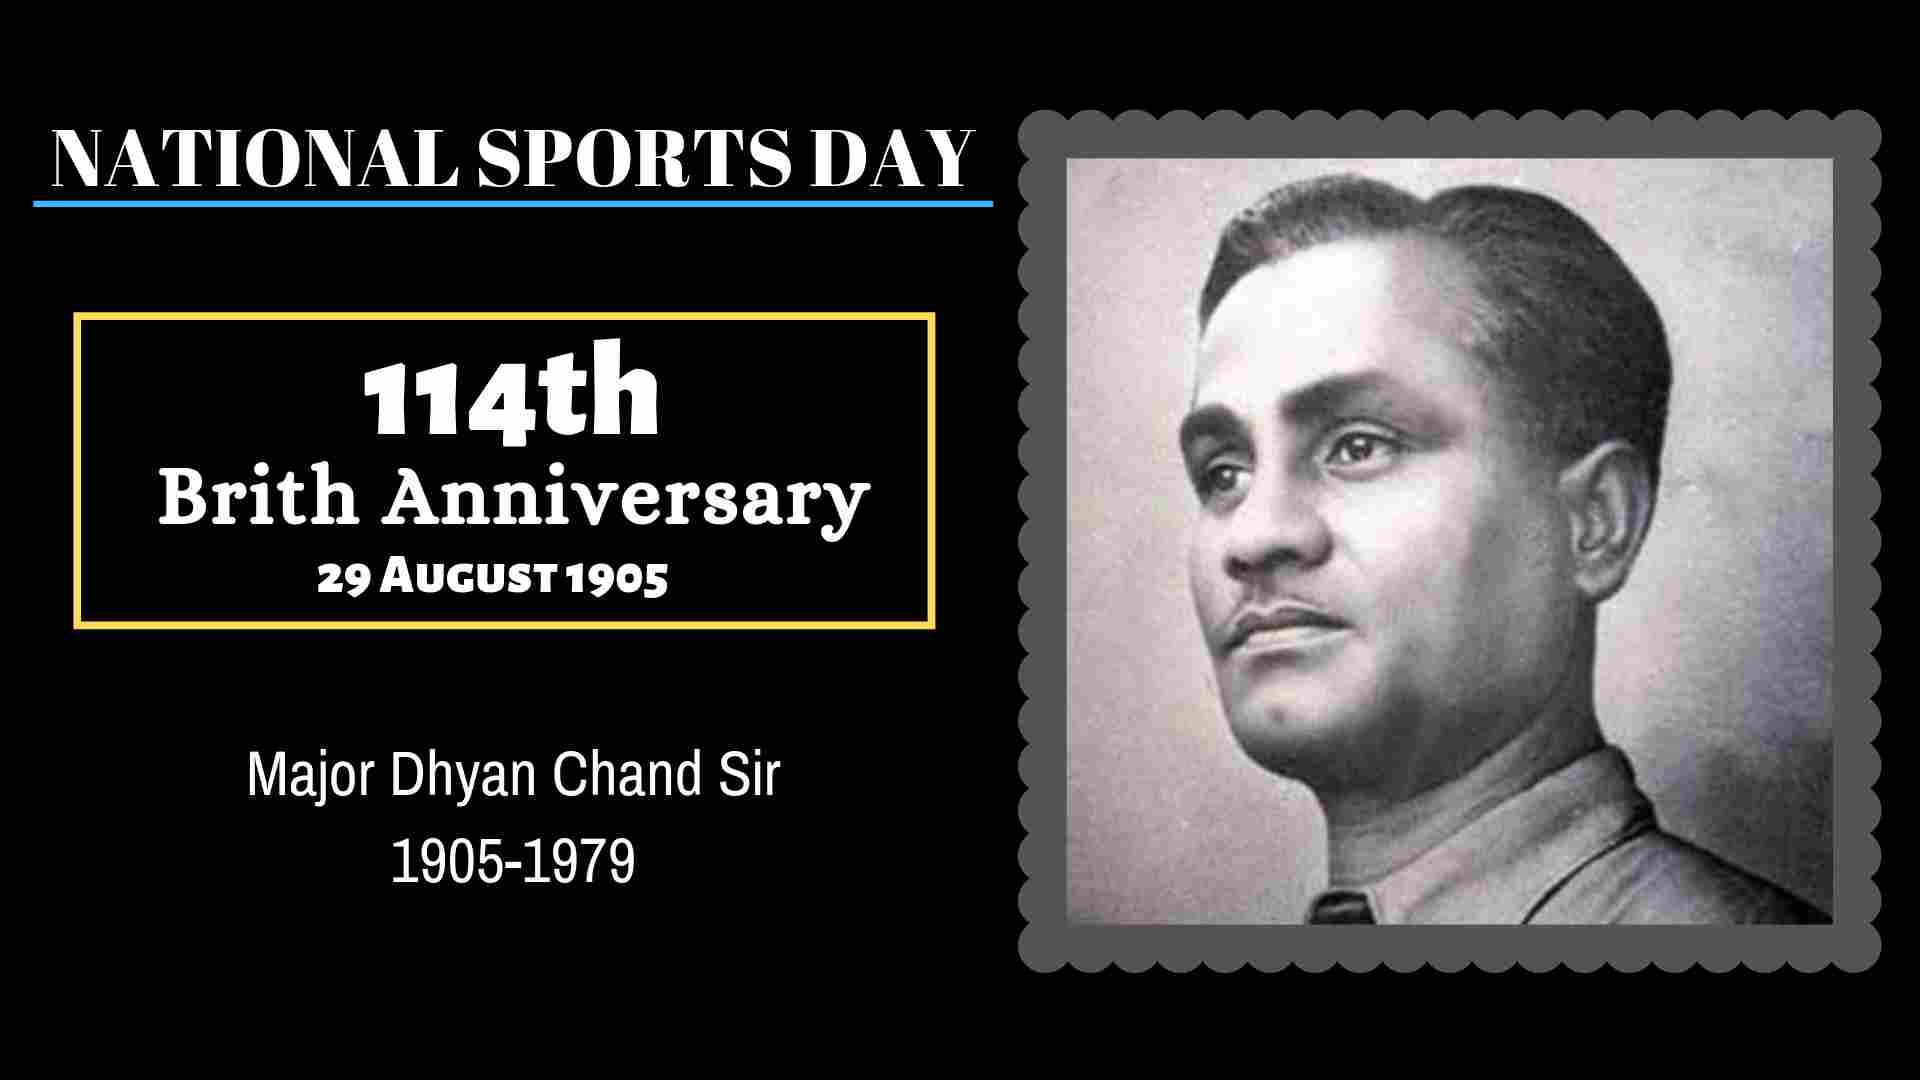 India celebrates 114th Birthday Anniversary Of Major Dhyan Chand on National Sports Day